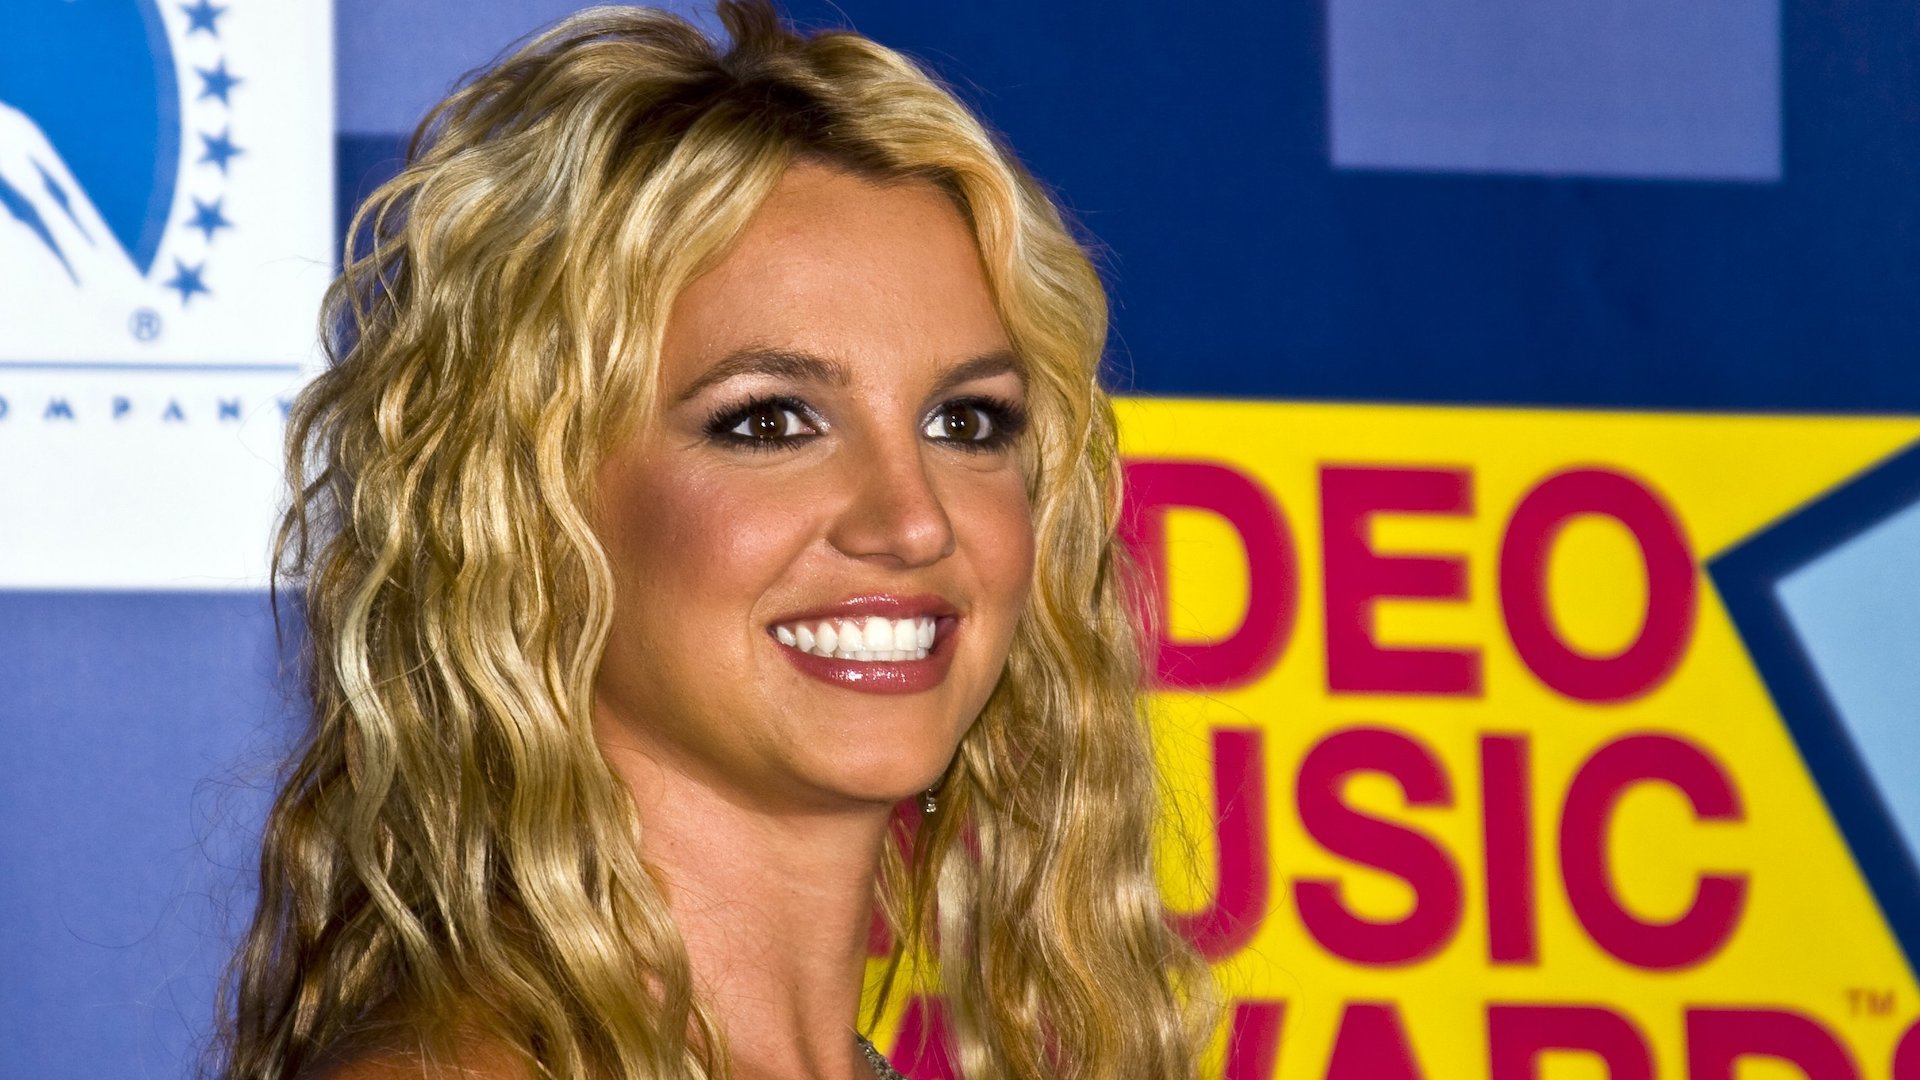 Britney Spears in the press room at the 2008 MTV Video Music Awards 